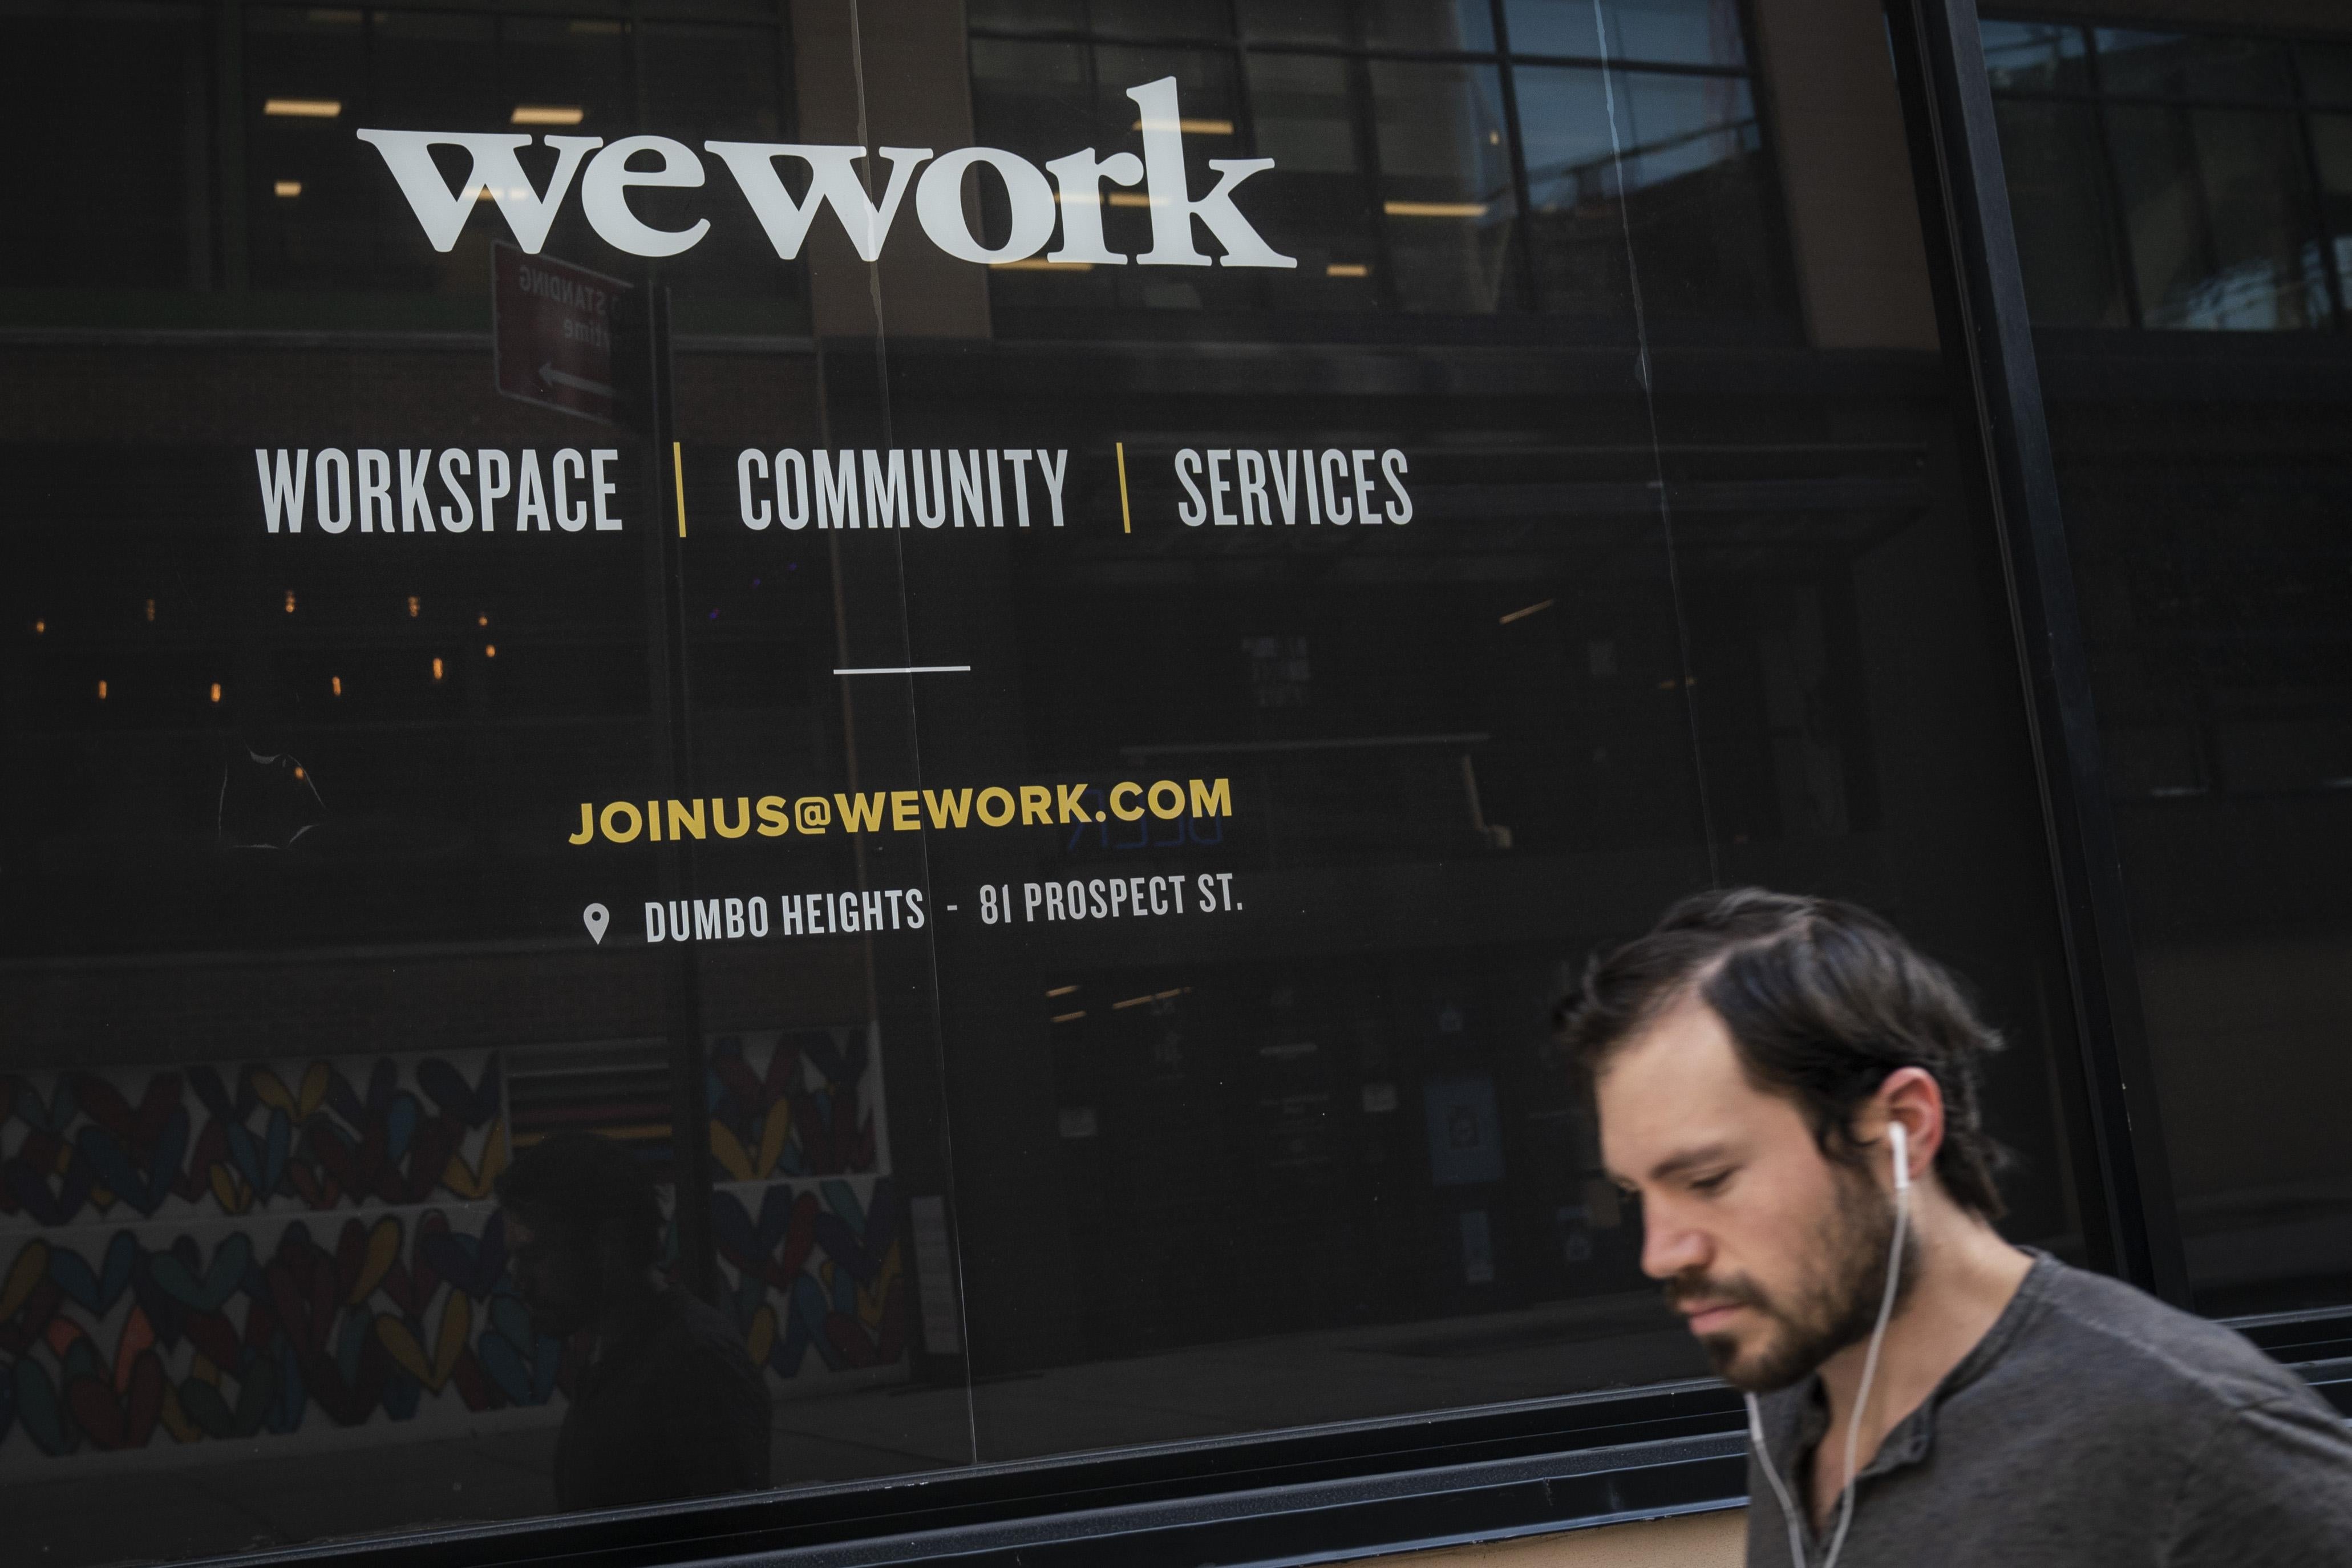 A man with earbuds in walks by the façade of a WeWork building